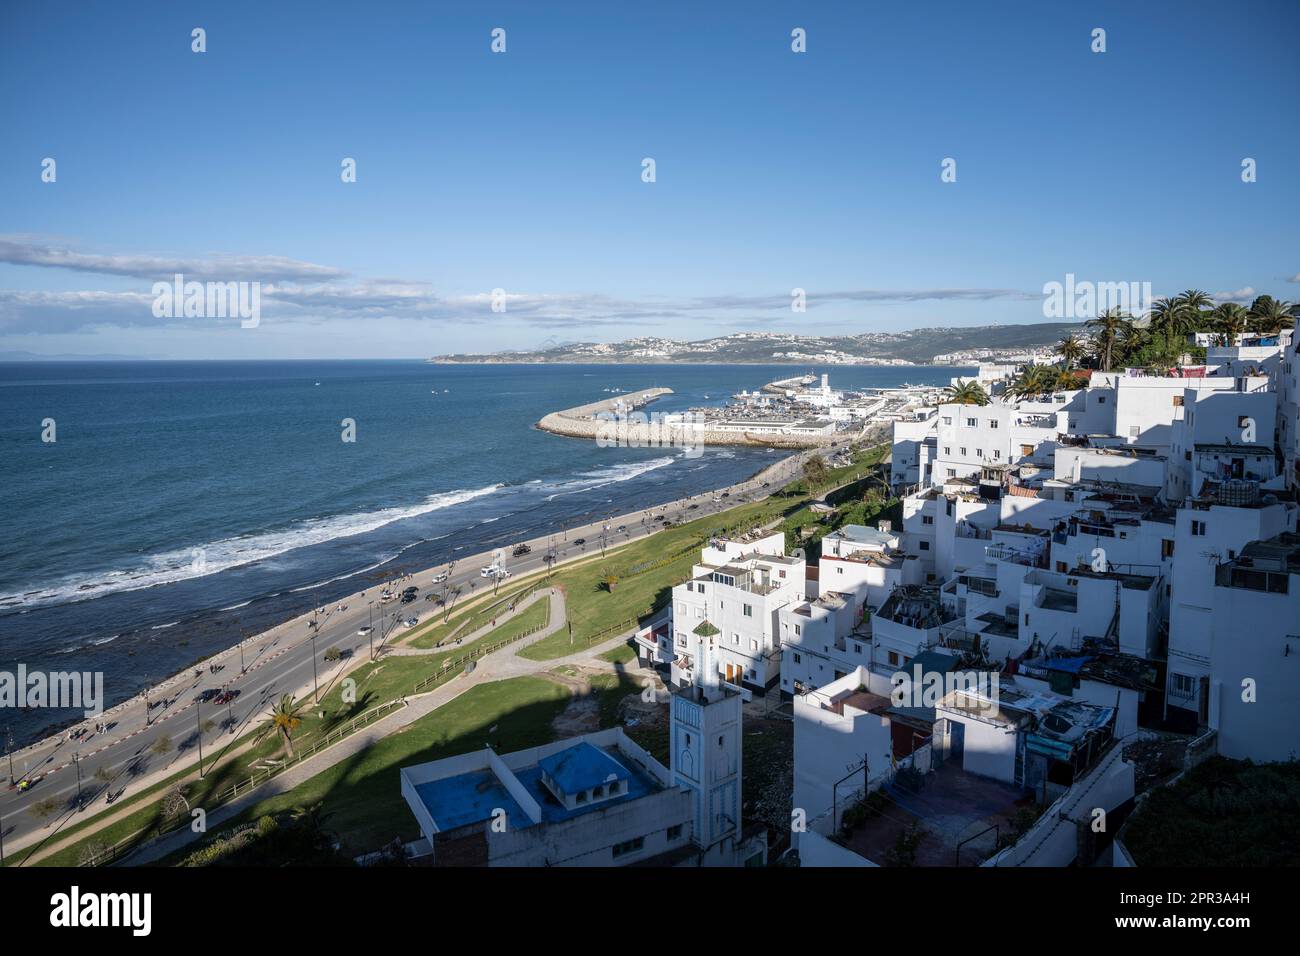 White houses of the Kasbah of Tangier with the port of the city in the background, seen from the defensive walls of the city. Stock Photo